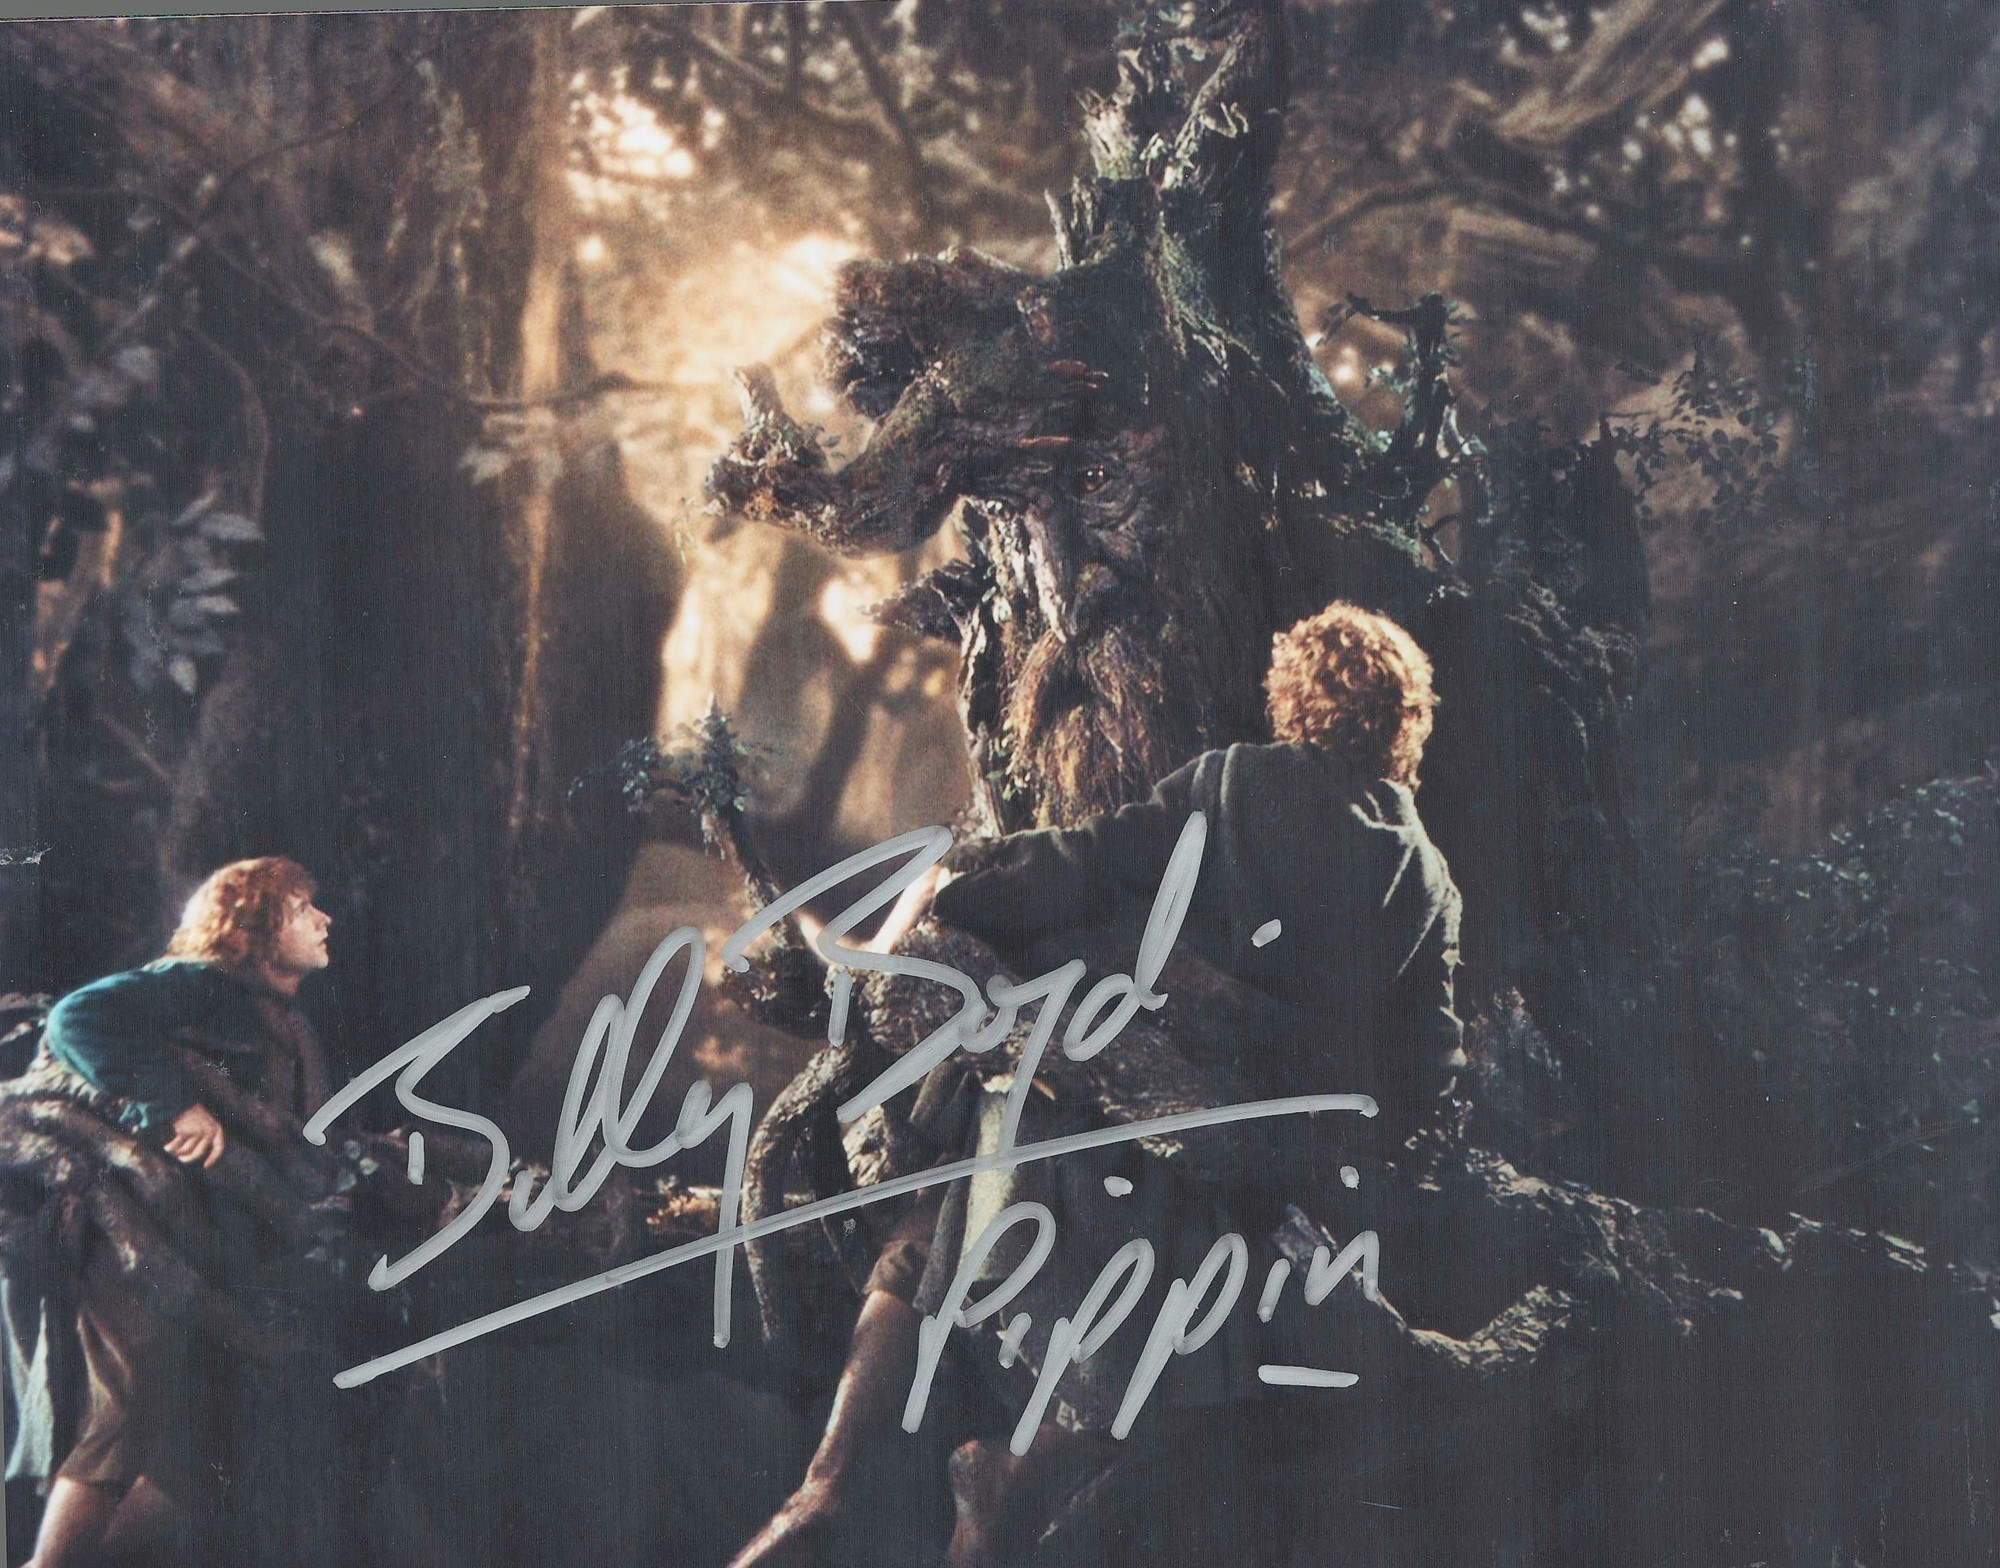 Lord Of The Rings Actor, Billy Boyd signed 10x8 photograph. Boyd (born 28 August 1968) is a Scottish